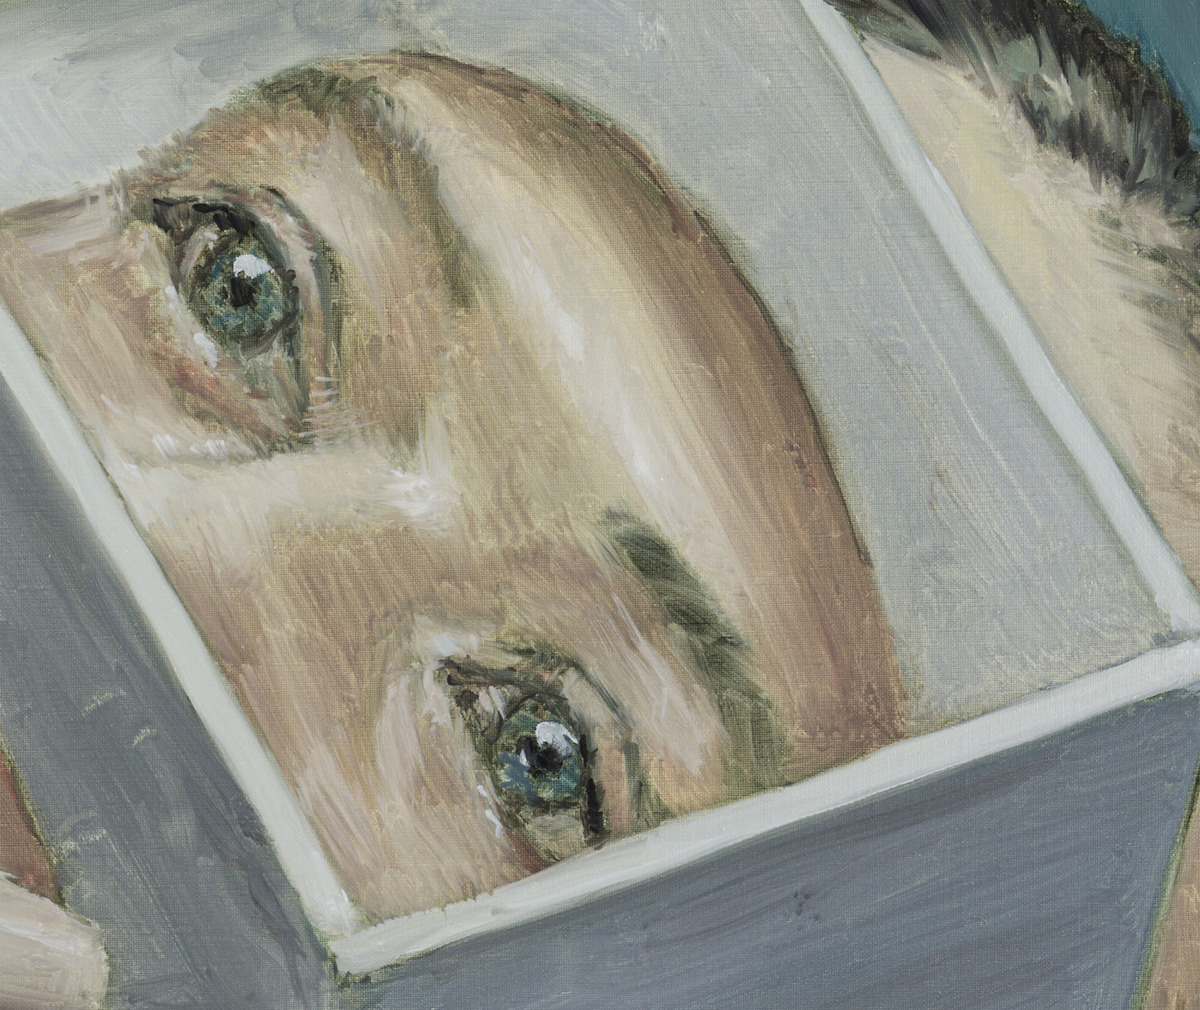 A painting showing a person's eyes and eyebrows on the surface of what appears to be a box